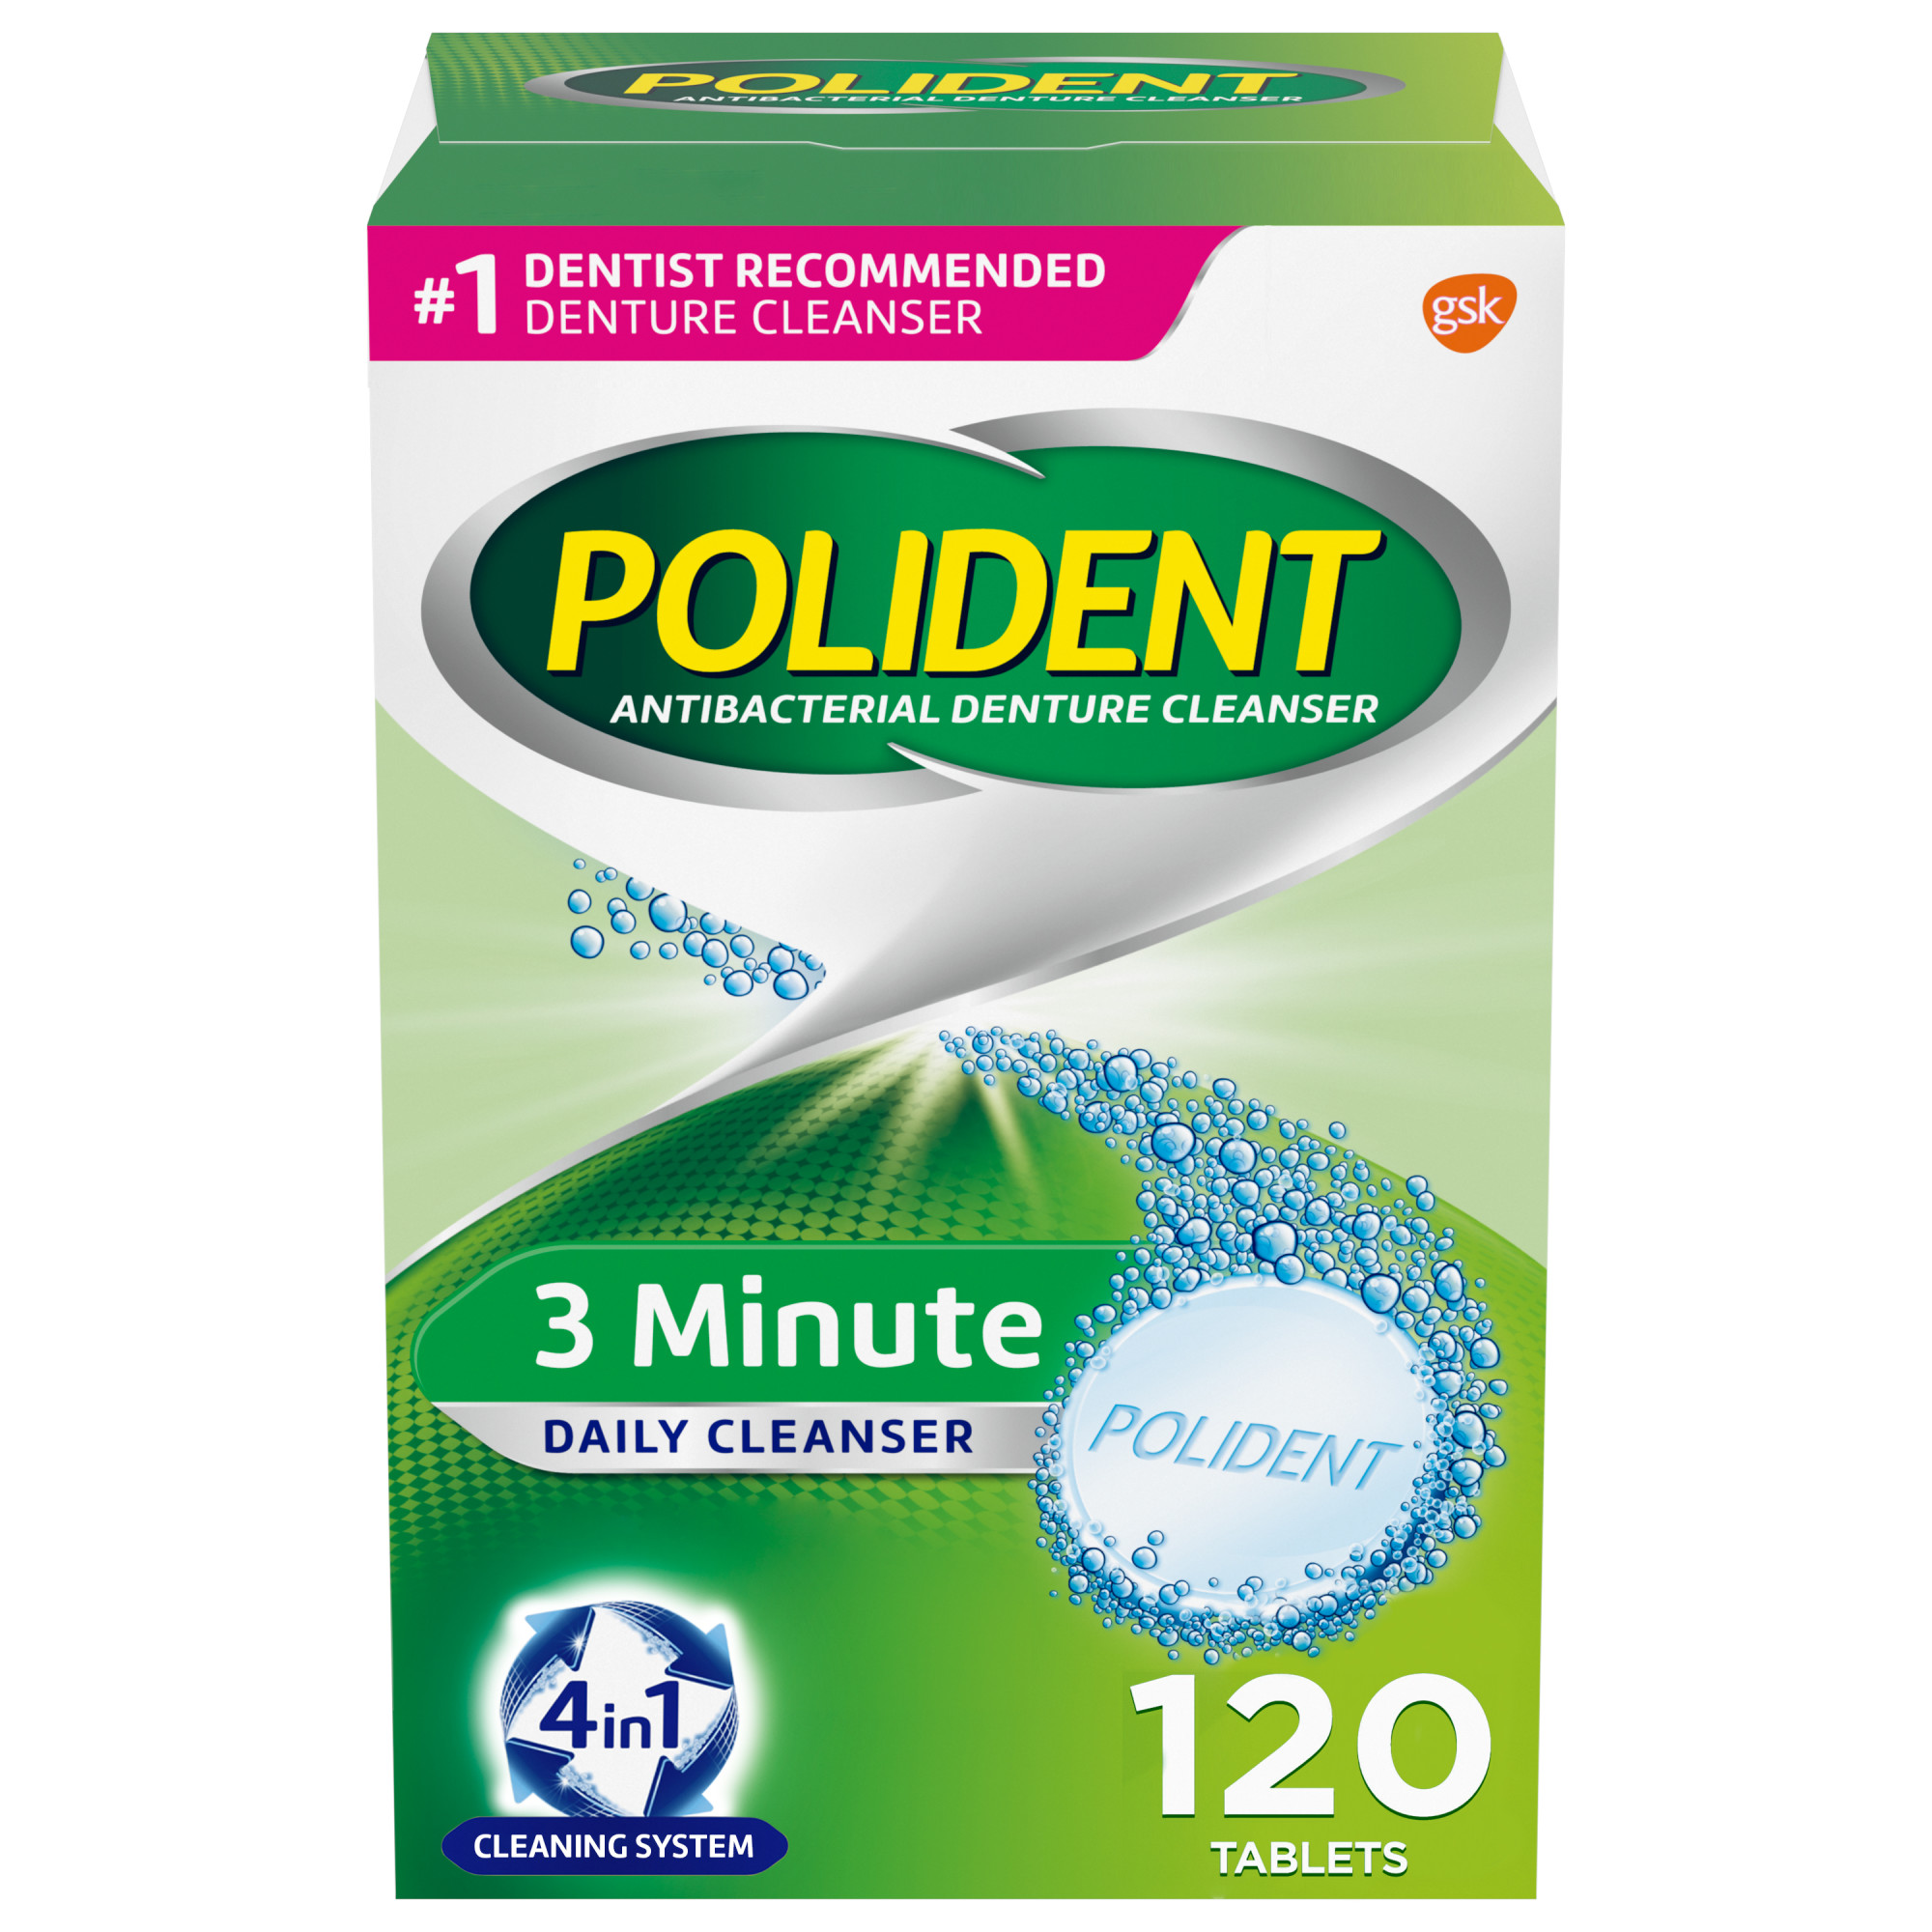 Polident 3 Minute Effervescent Antibacterial Denture Cleanser Tablets, 120 Count - image 1 of 12